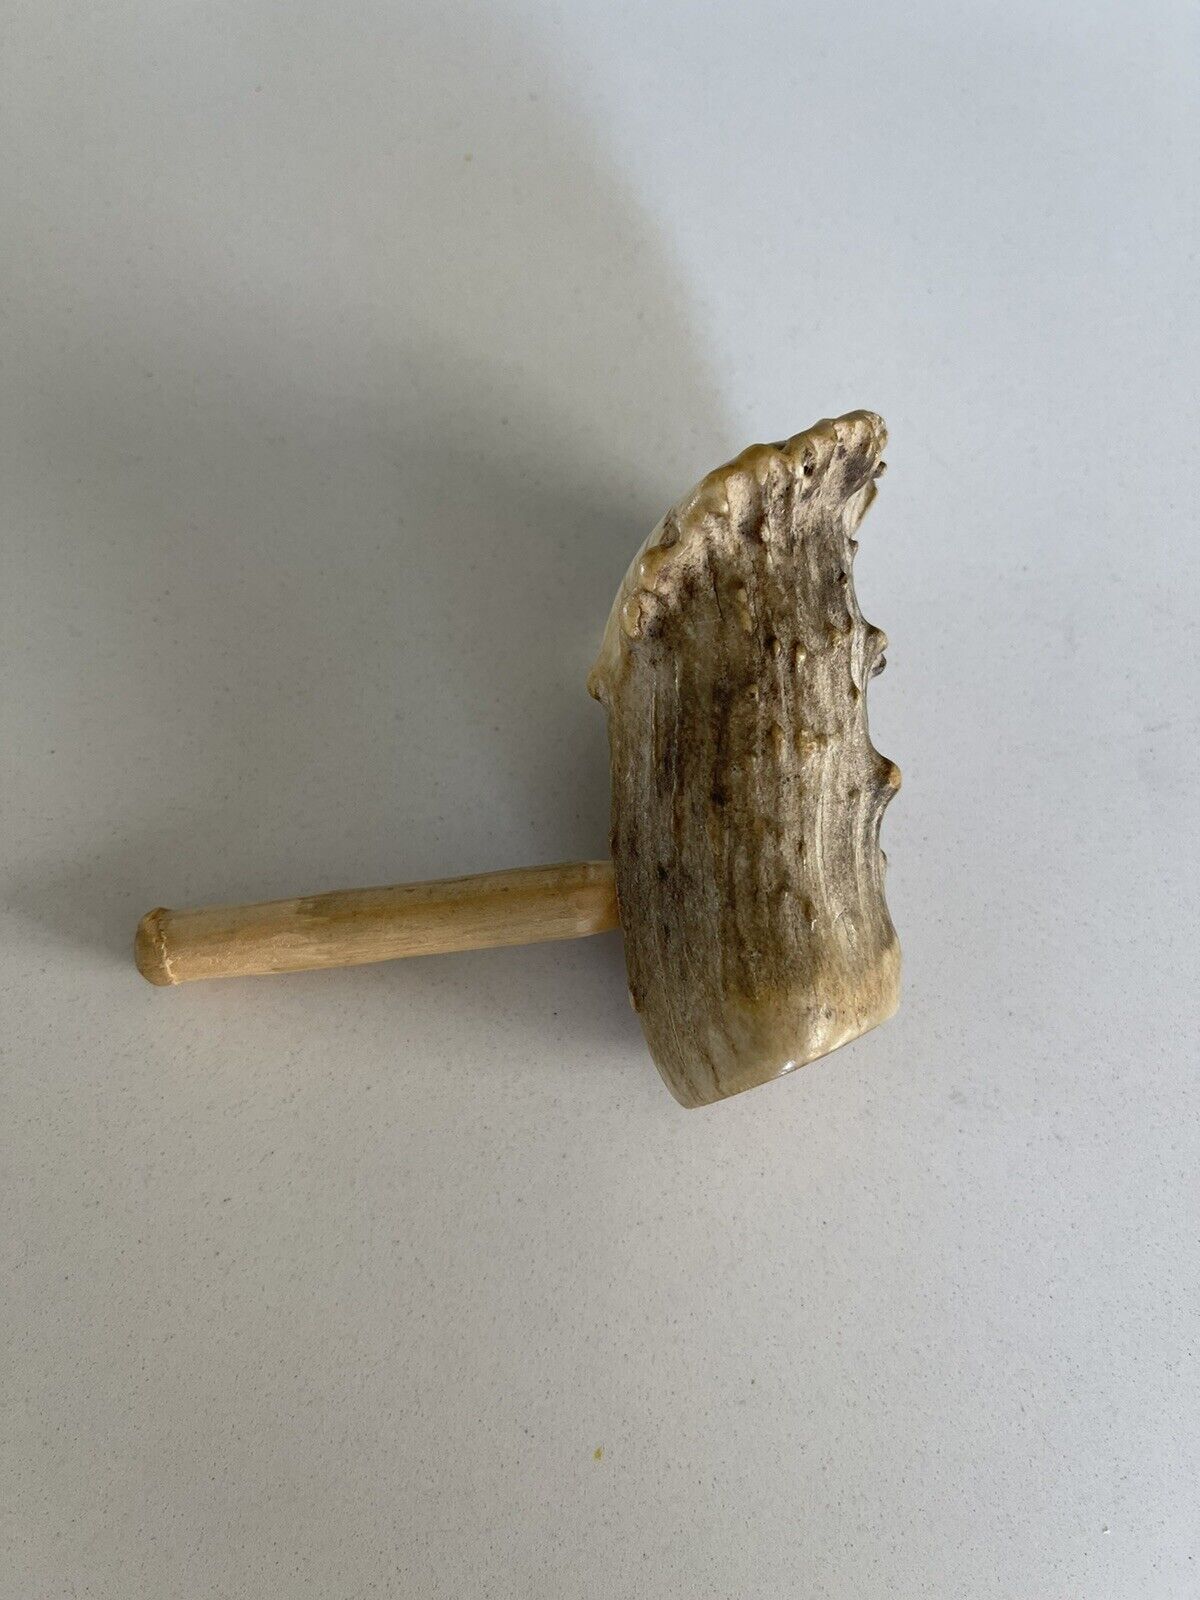 Home Made Antler Smoking Pipe 2x3x4” Excellent Unique OOAK